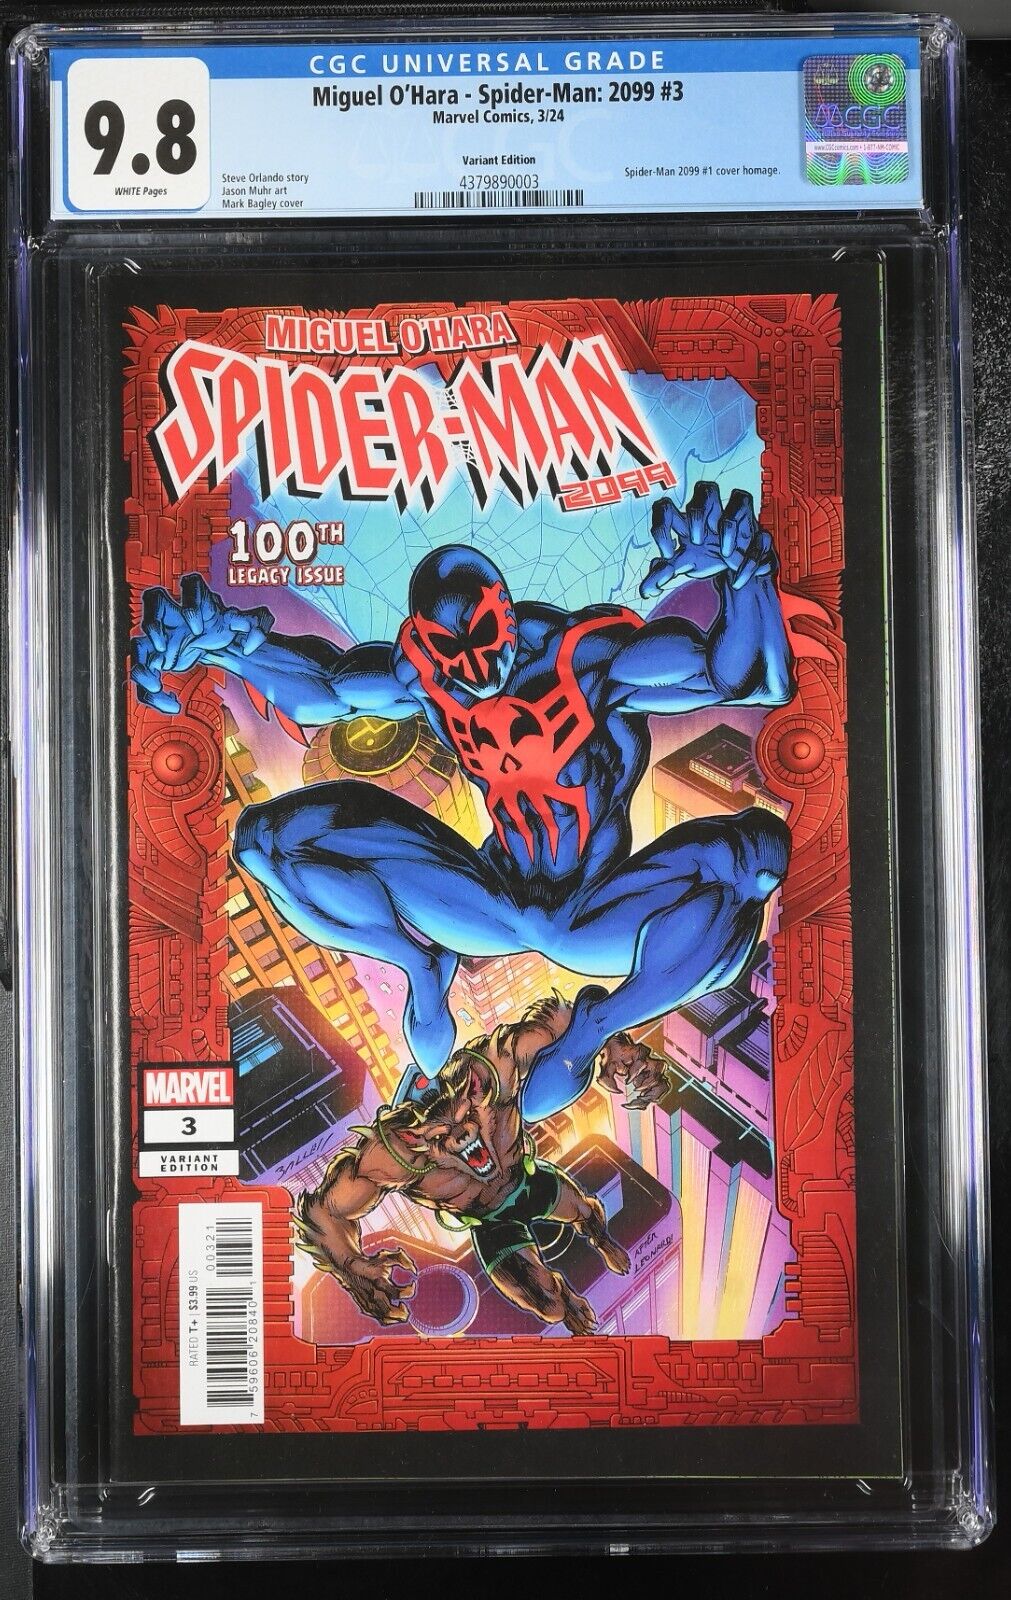 Miguel O'Hara Spider-Man 2099 #3 CGC 9.8 1992 #1 Homage Cover Marvel 2024 LG 100